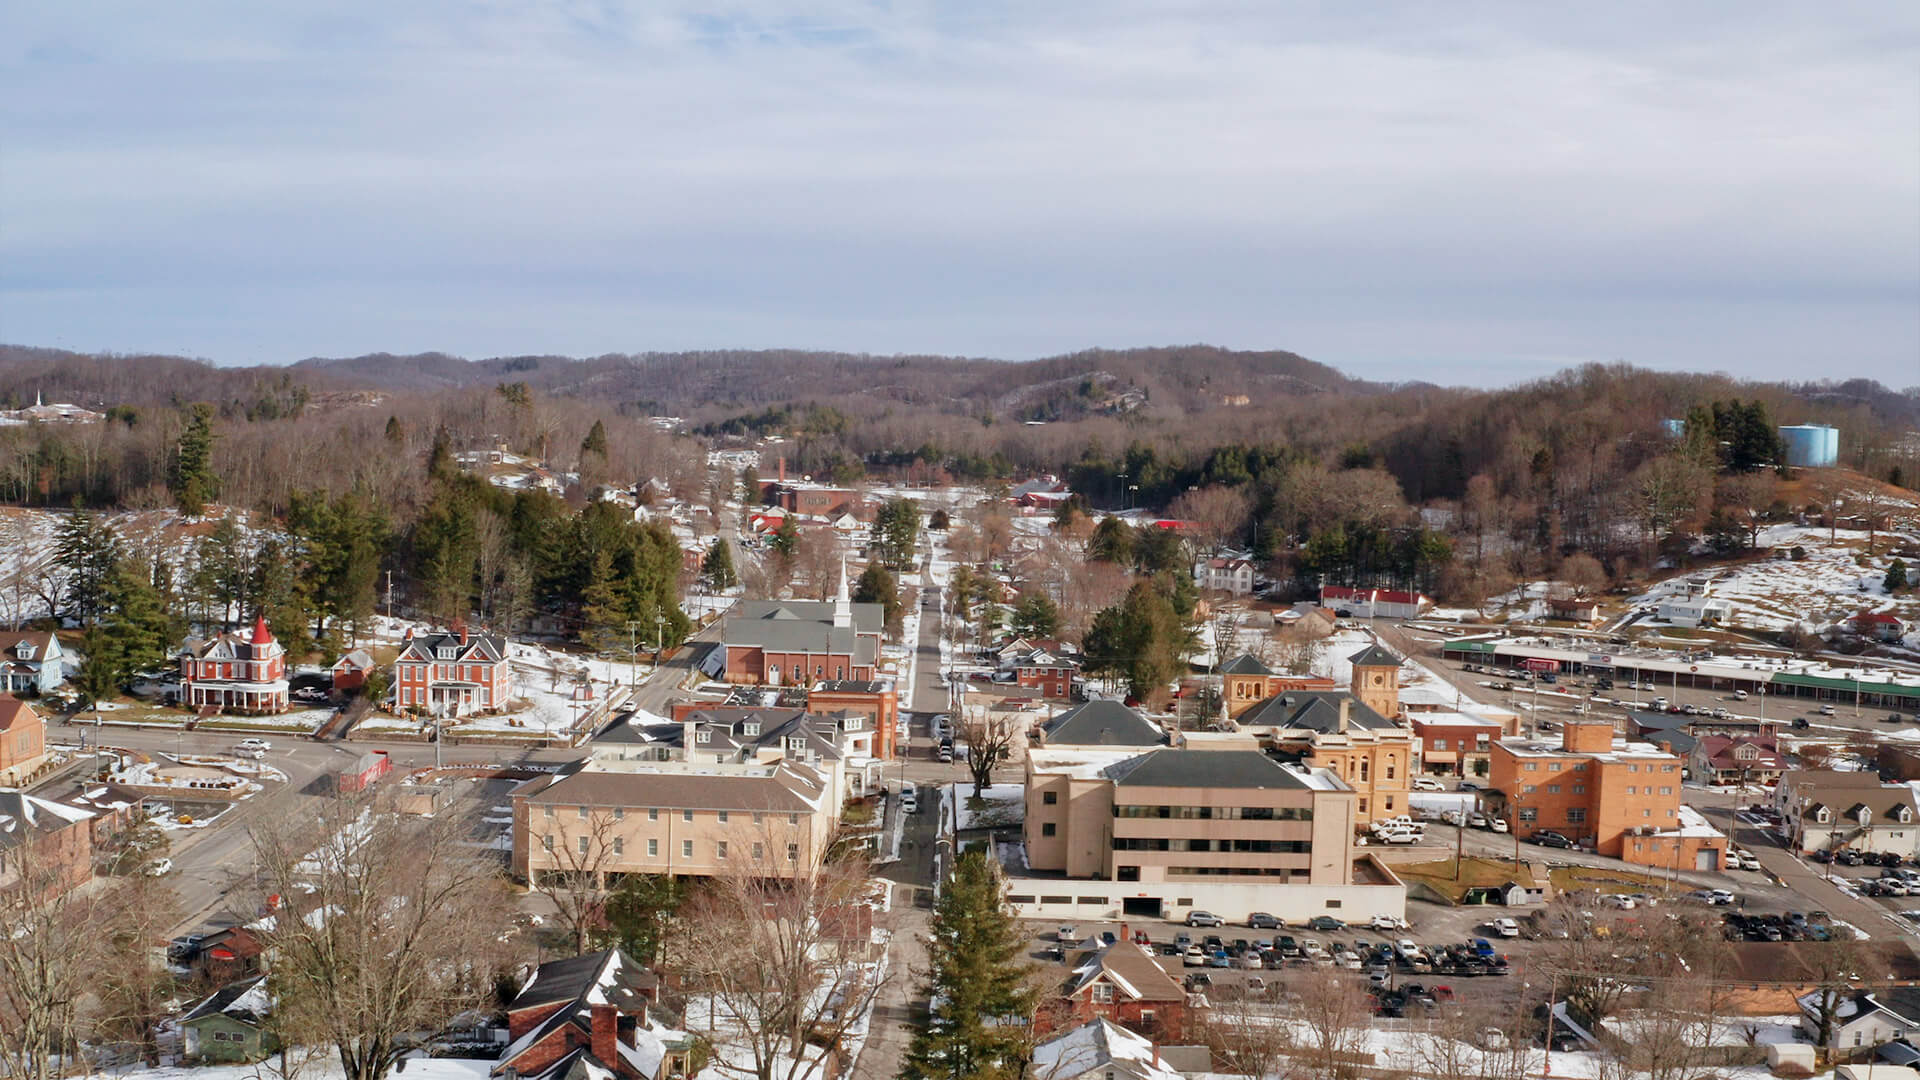 An overlook of a town in the U.S.